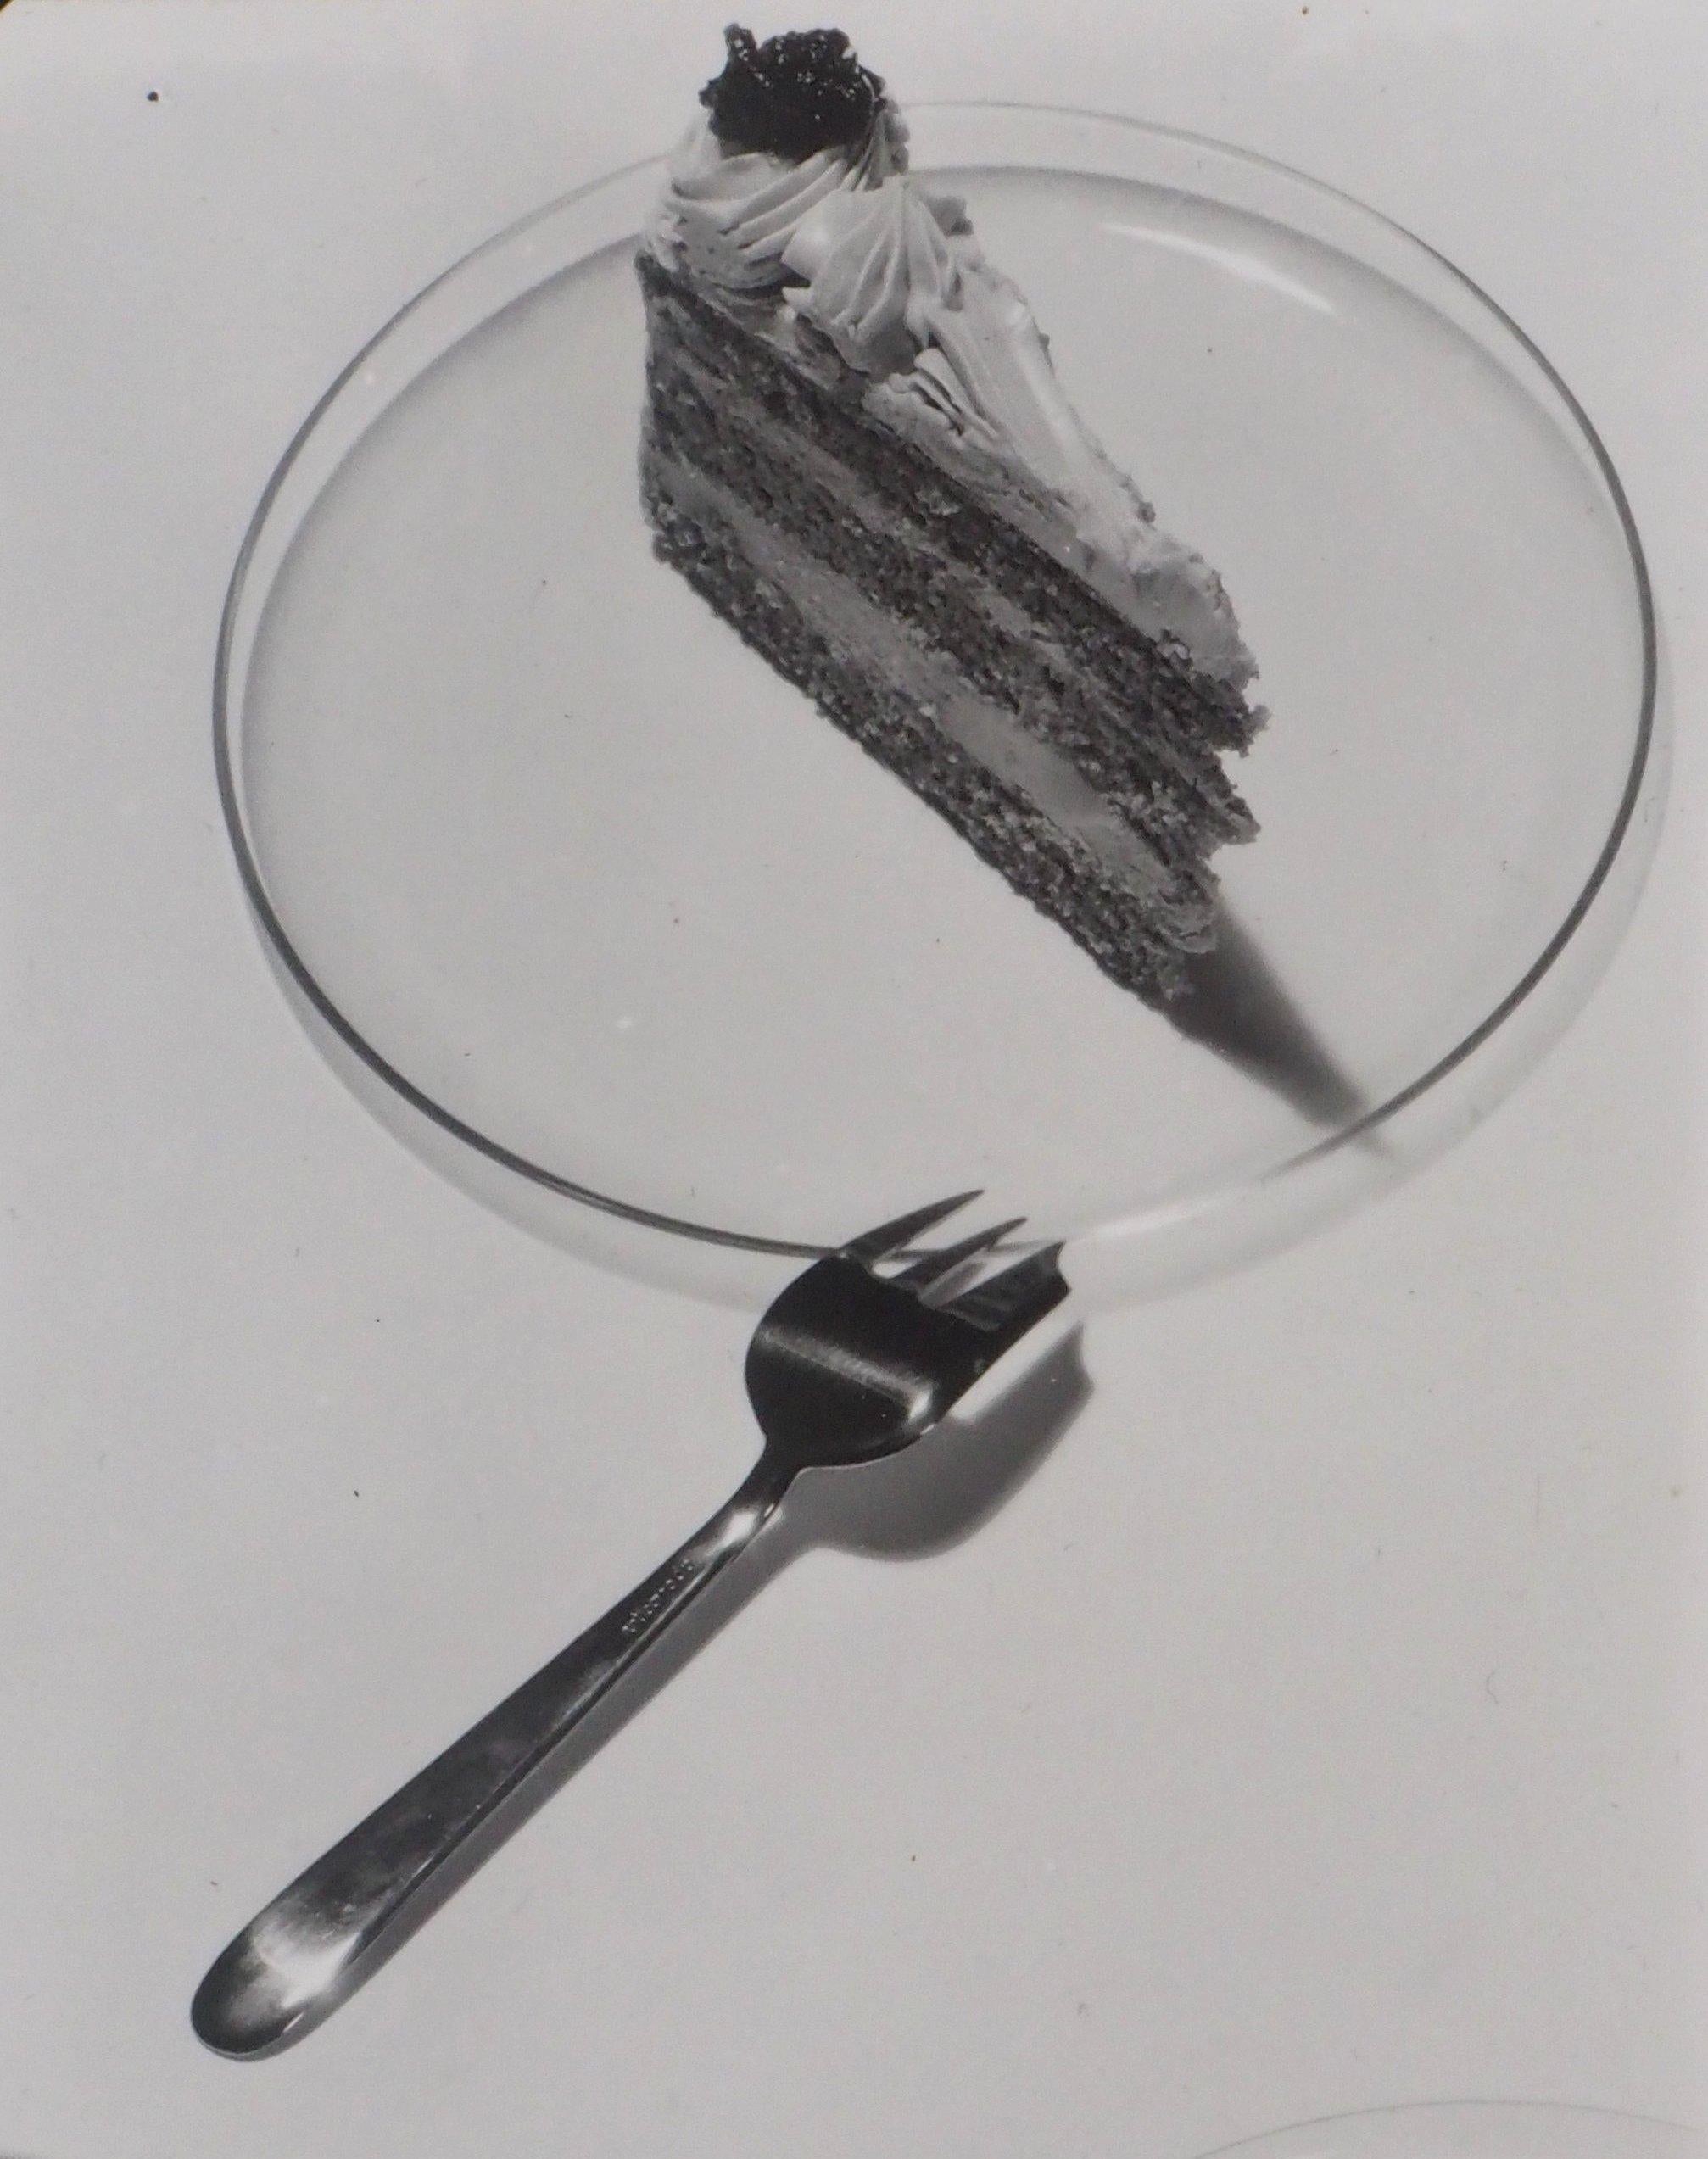 Josef Sudek
Dessert

Original gelatin silver print
Printed in the 1940s
20 x 14.6 cm (c. 7.8 x 5.5 in)
Signed on the back by Jan Strimpl (The last assistant of Josef Sudek during the final decade of Sudek’s life) and annotated 